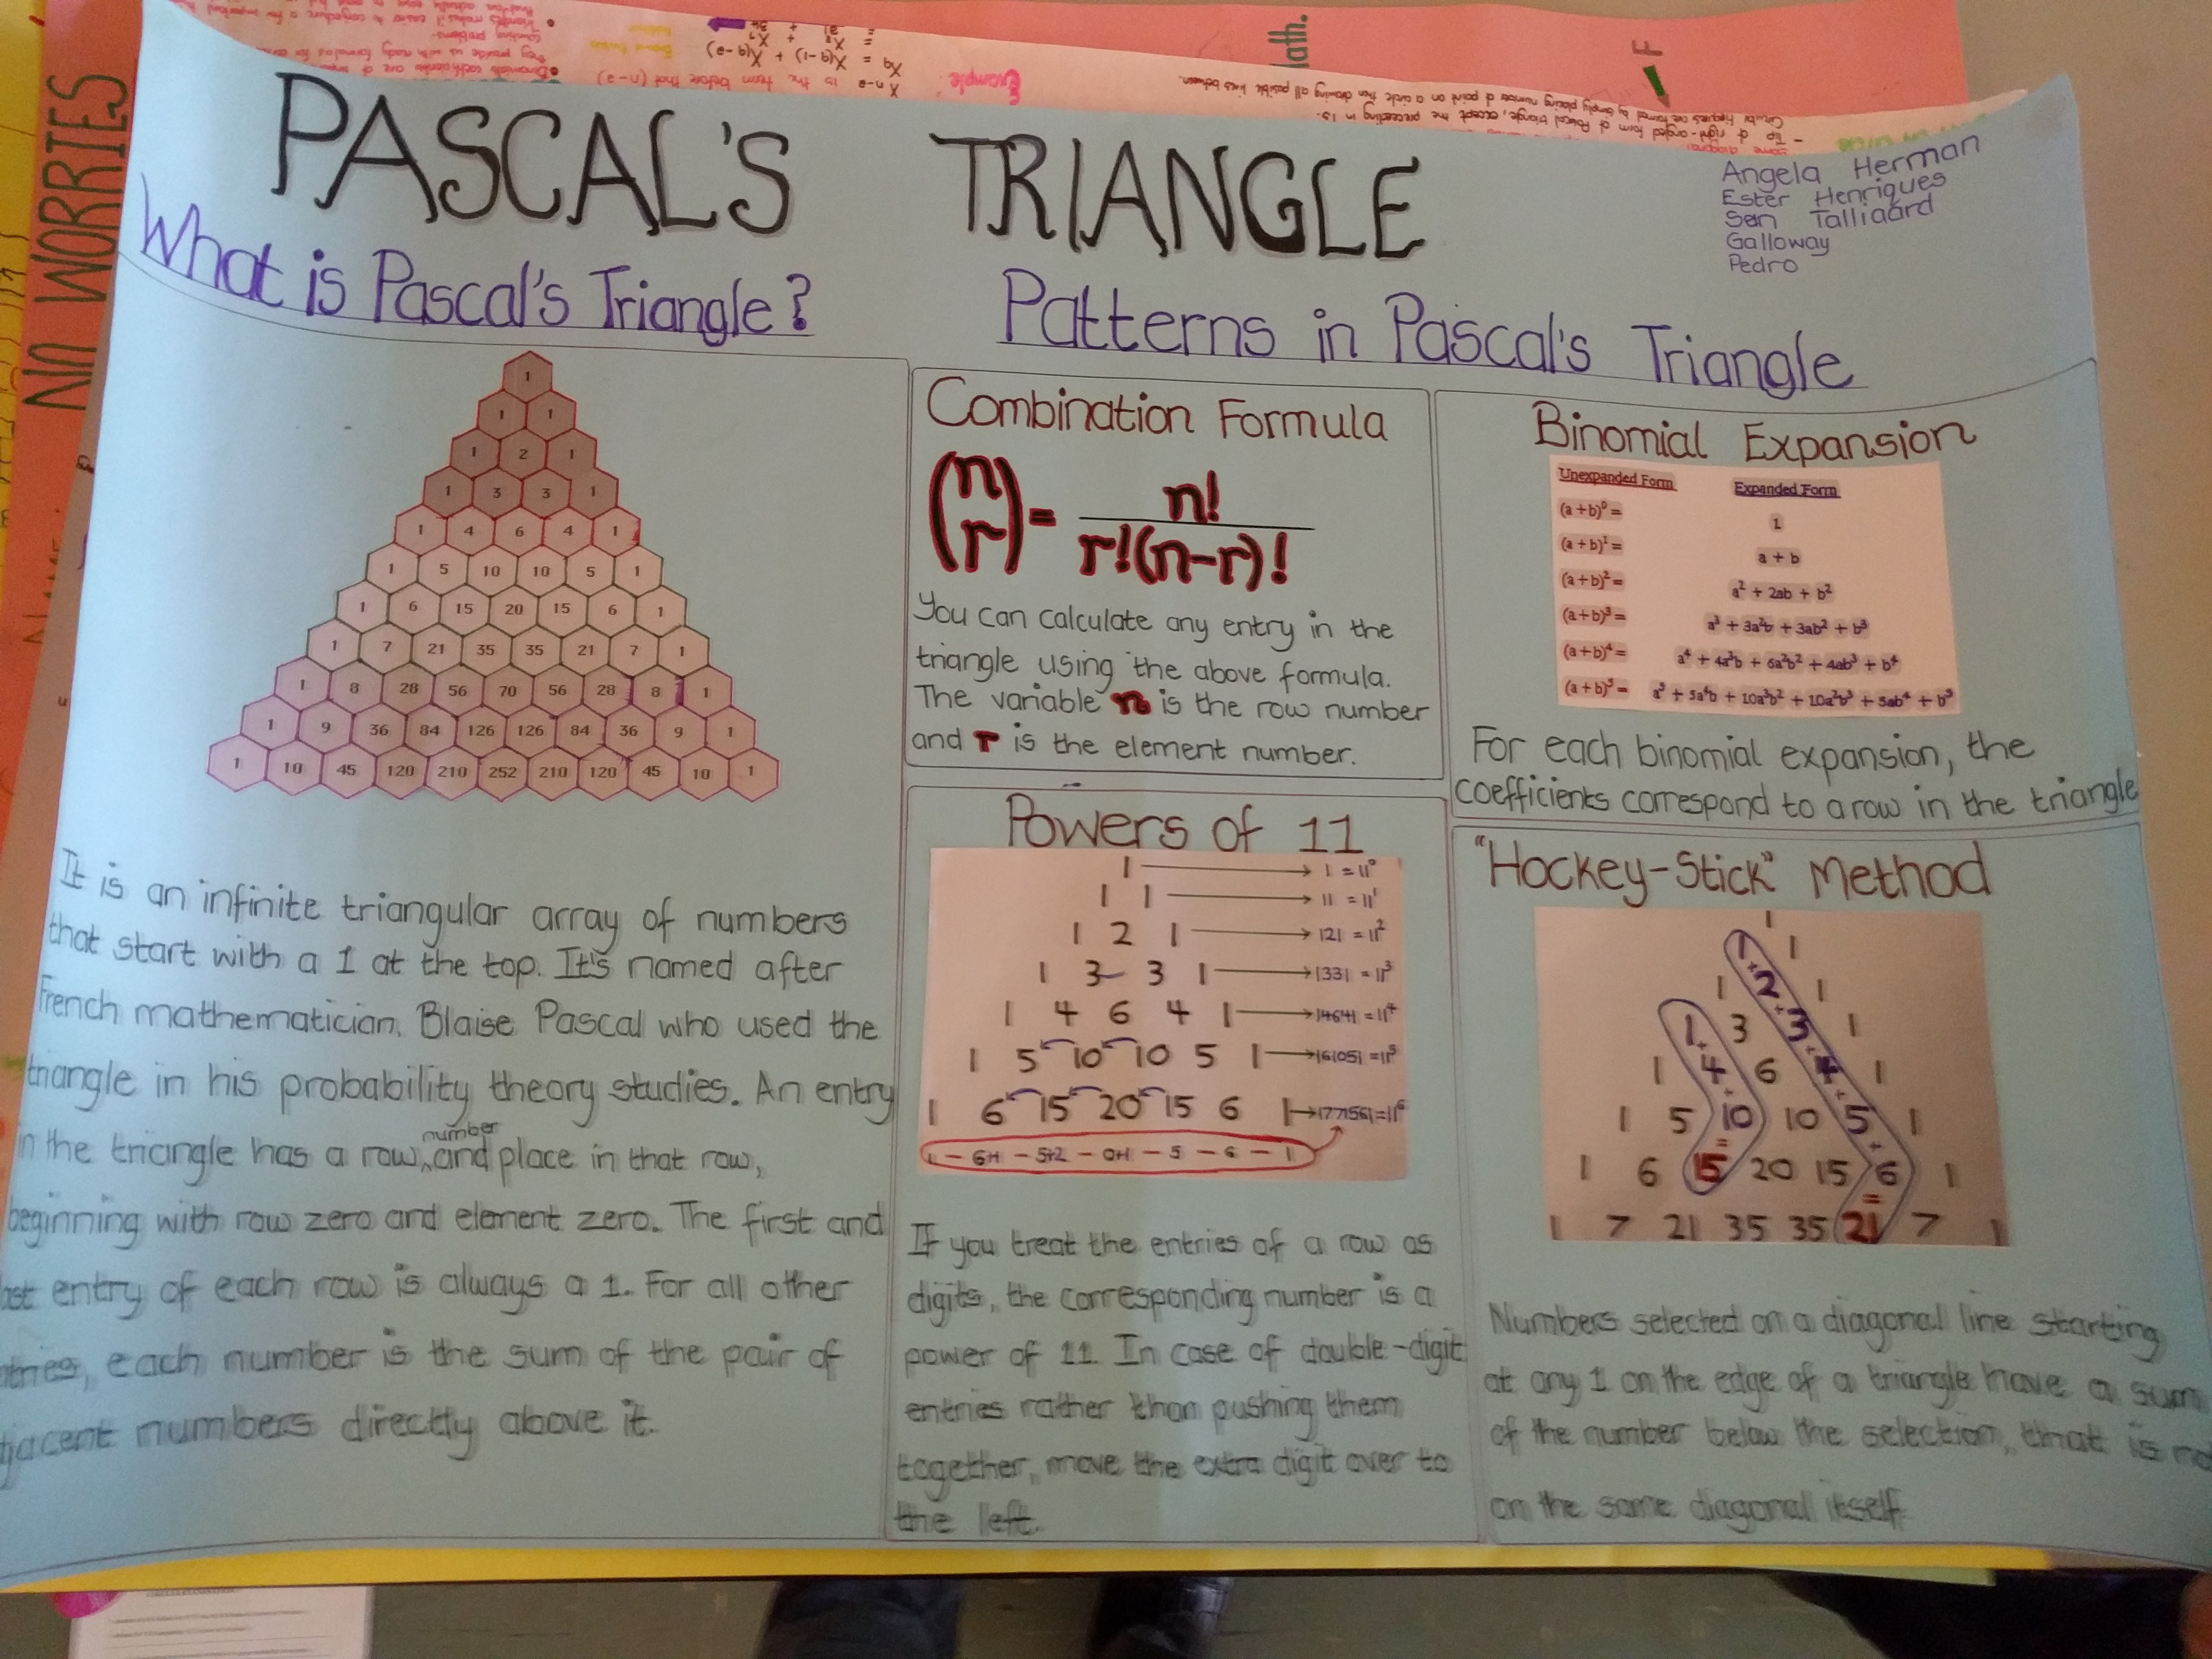 Patterns in Pascals triangle